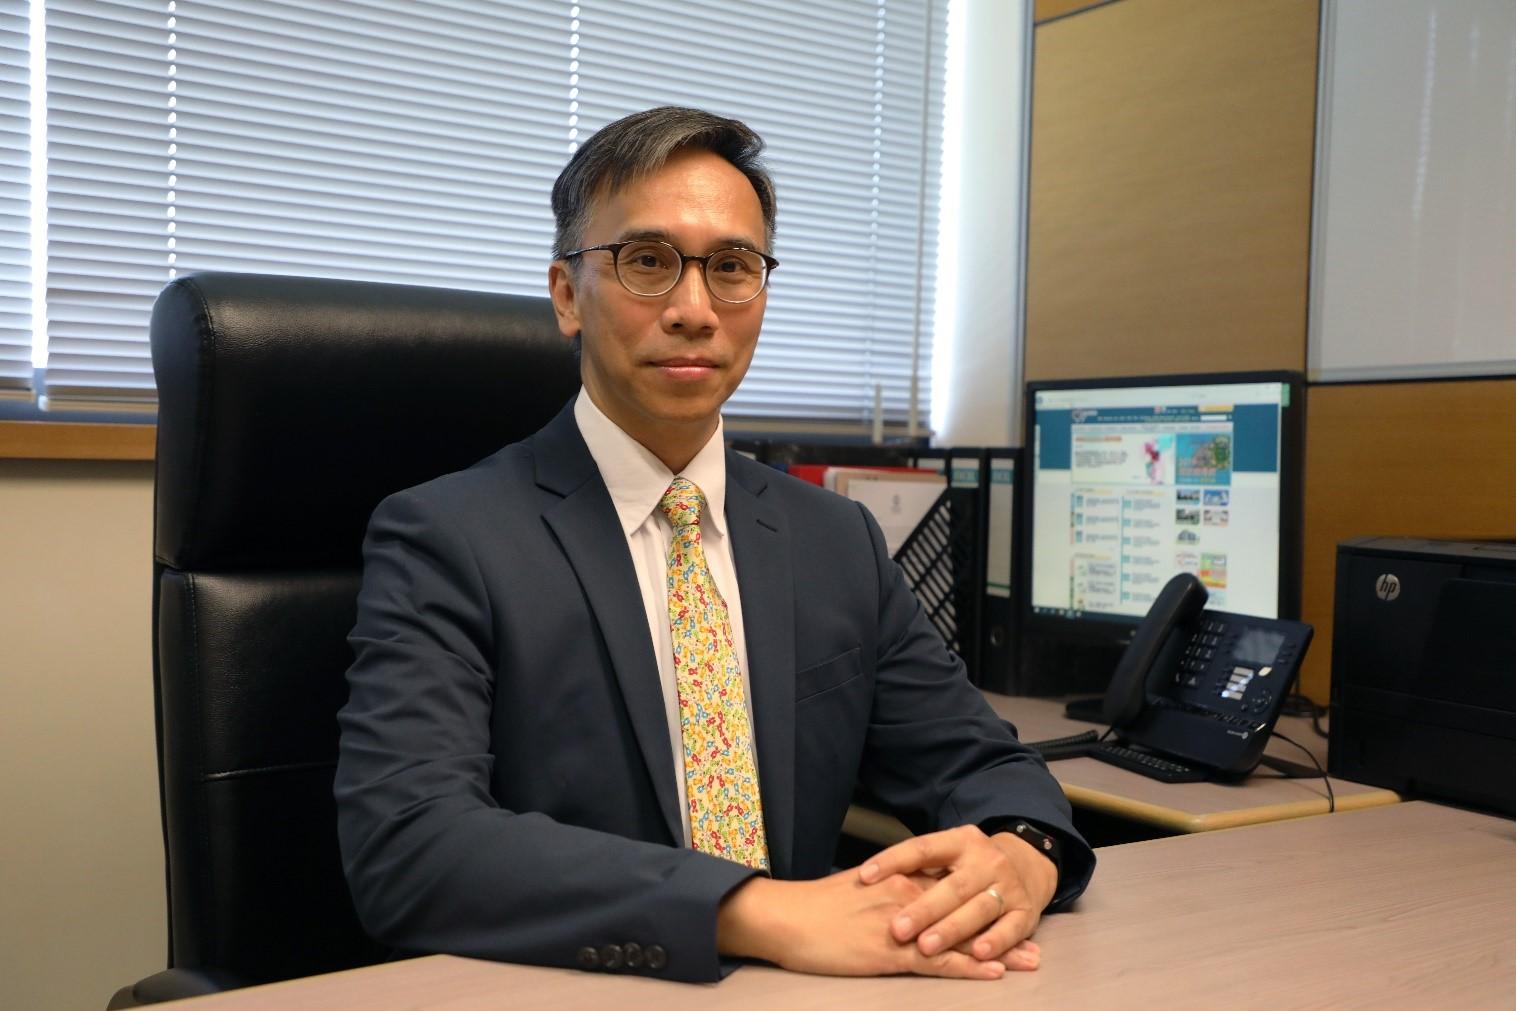 The Hospital Authority announced today (October 20) that Dr Wong Yiu-chung will be appointed as Cluster Chief Executive of New Territories West and Hospital Chief Executive of Tuen Mun Hospital with effect from November 1, 2022.